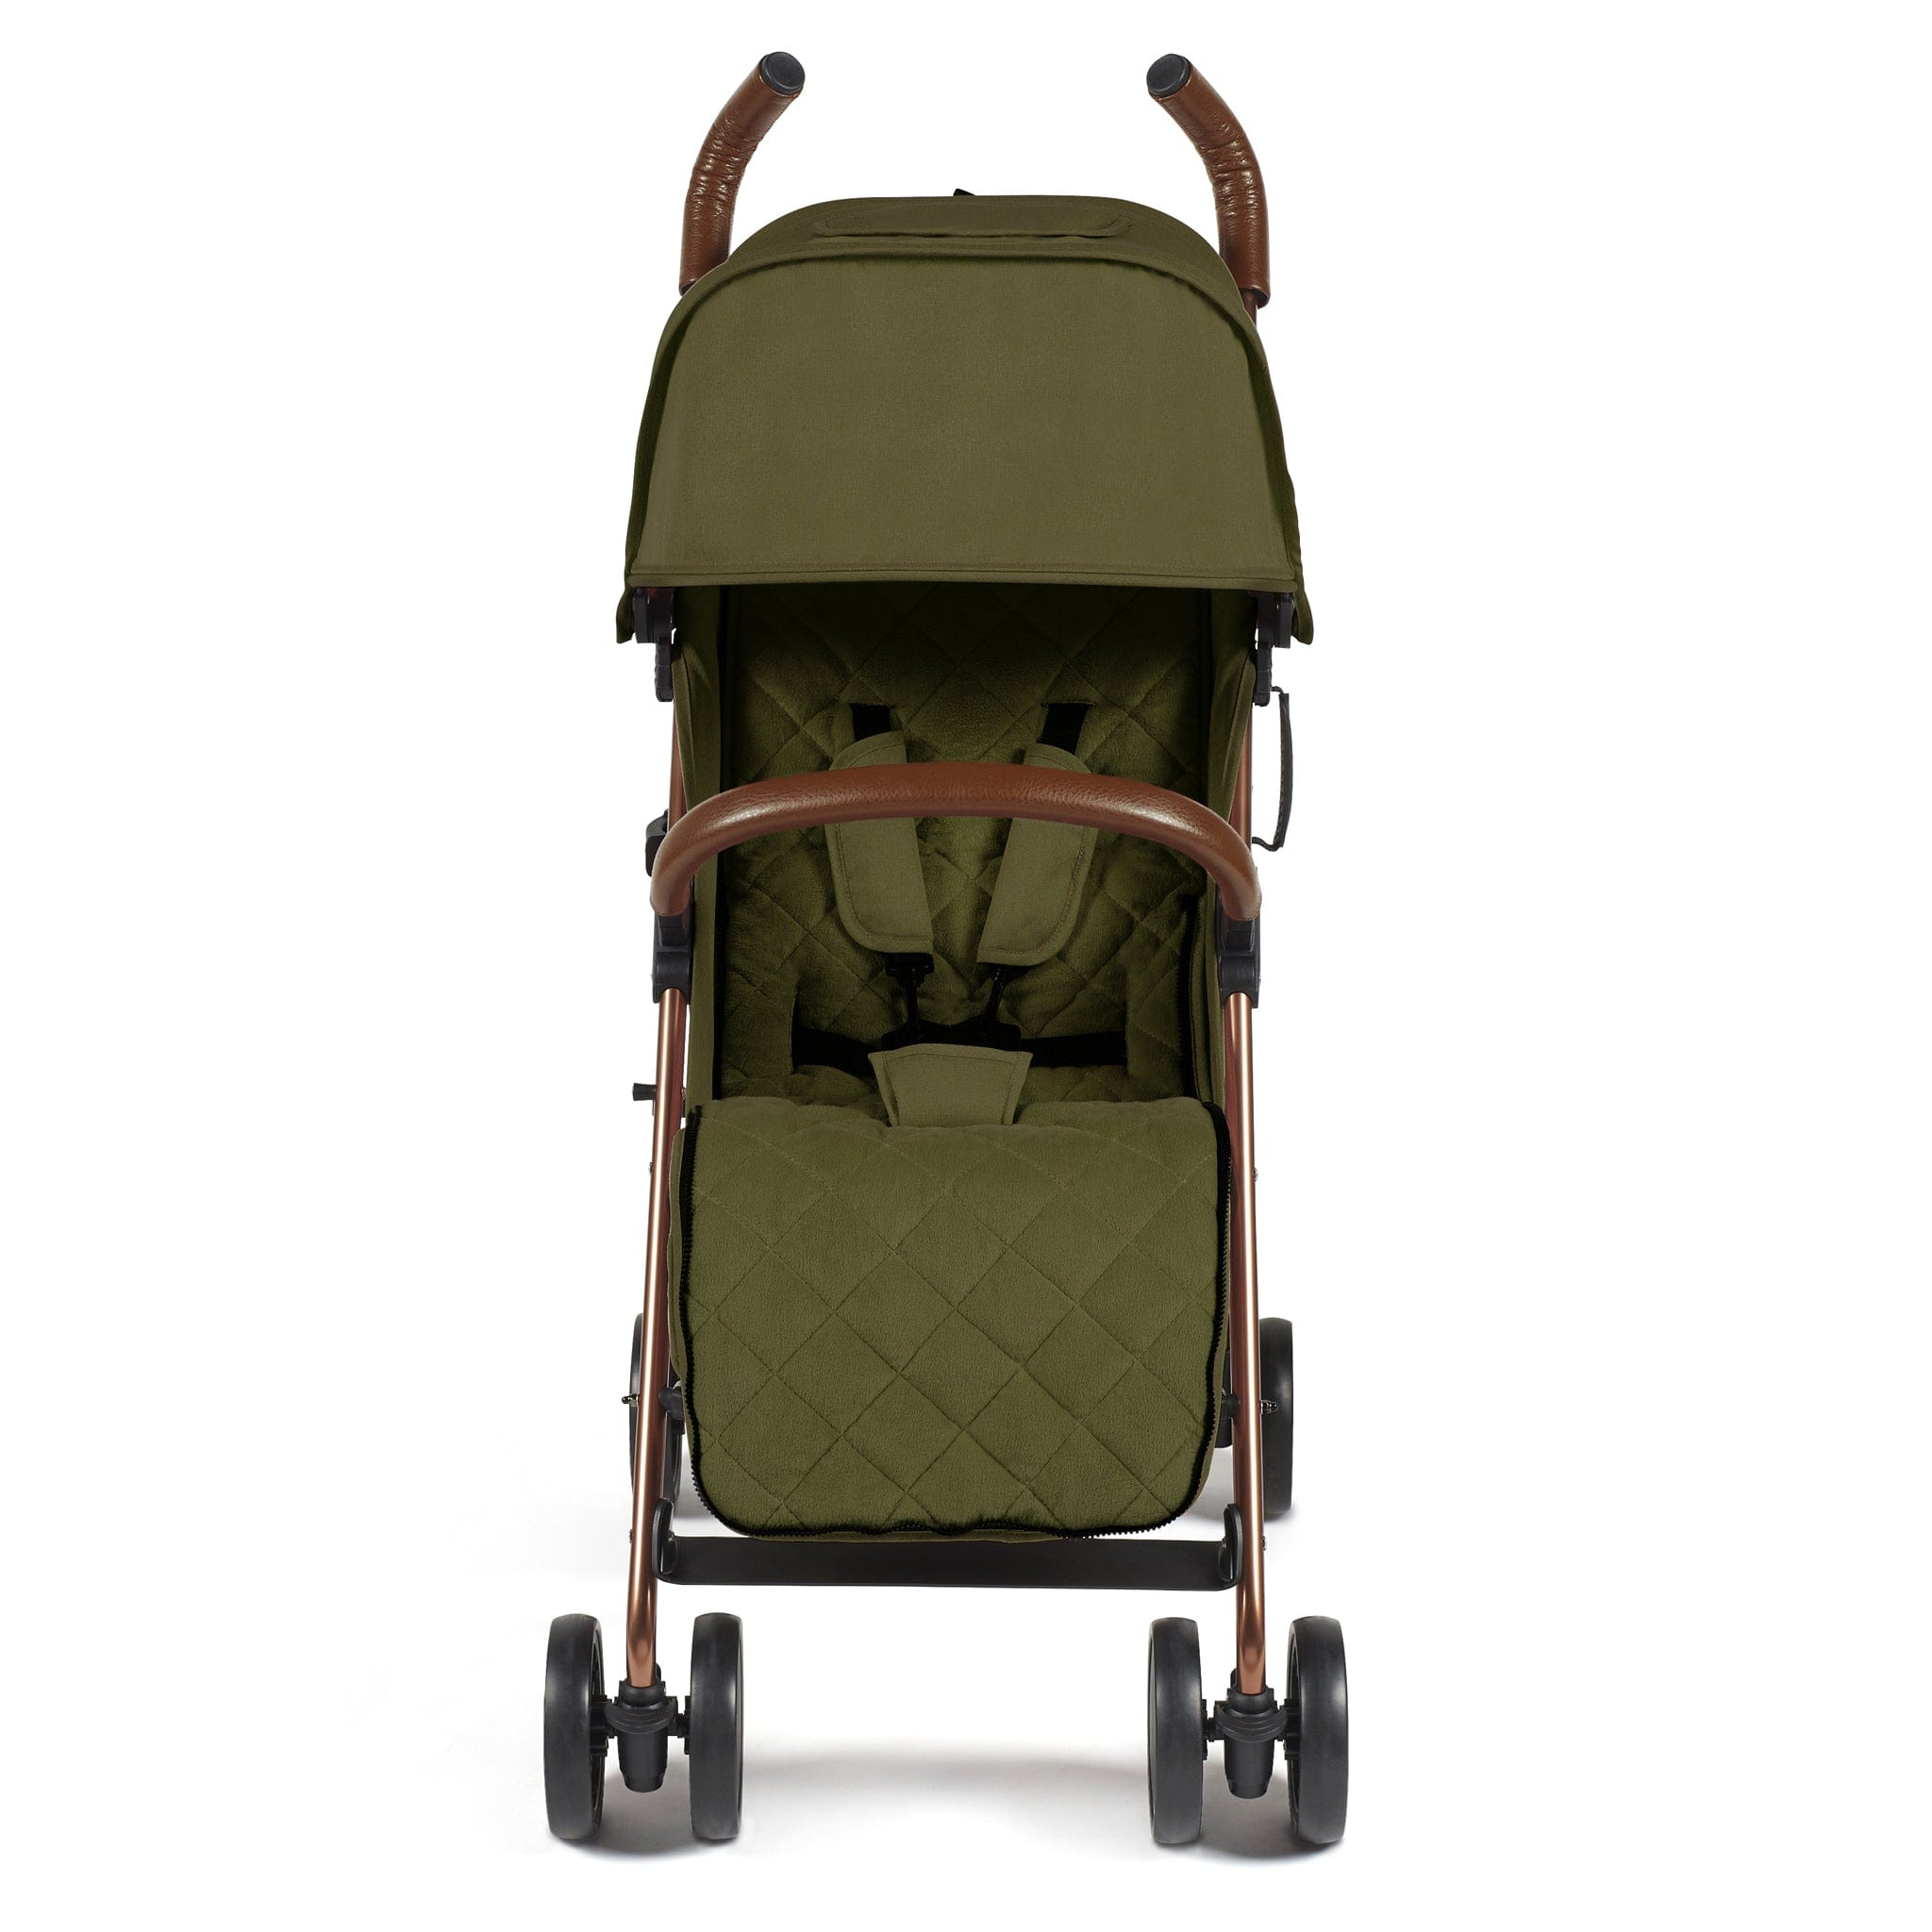 Ickle Bubba baby pushchairs Ickle Bubba Discovery Max Pushchair Rose Gold/Khaki 15-002-200-045